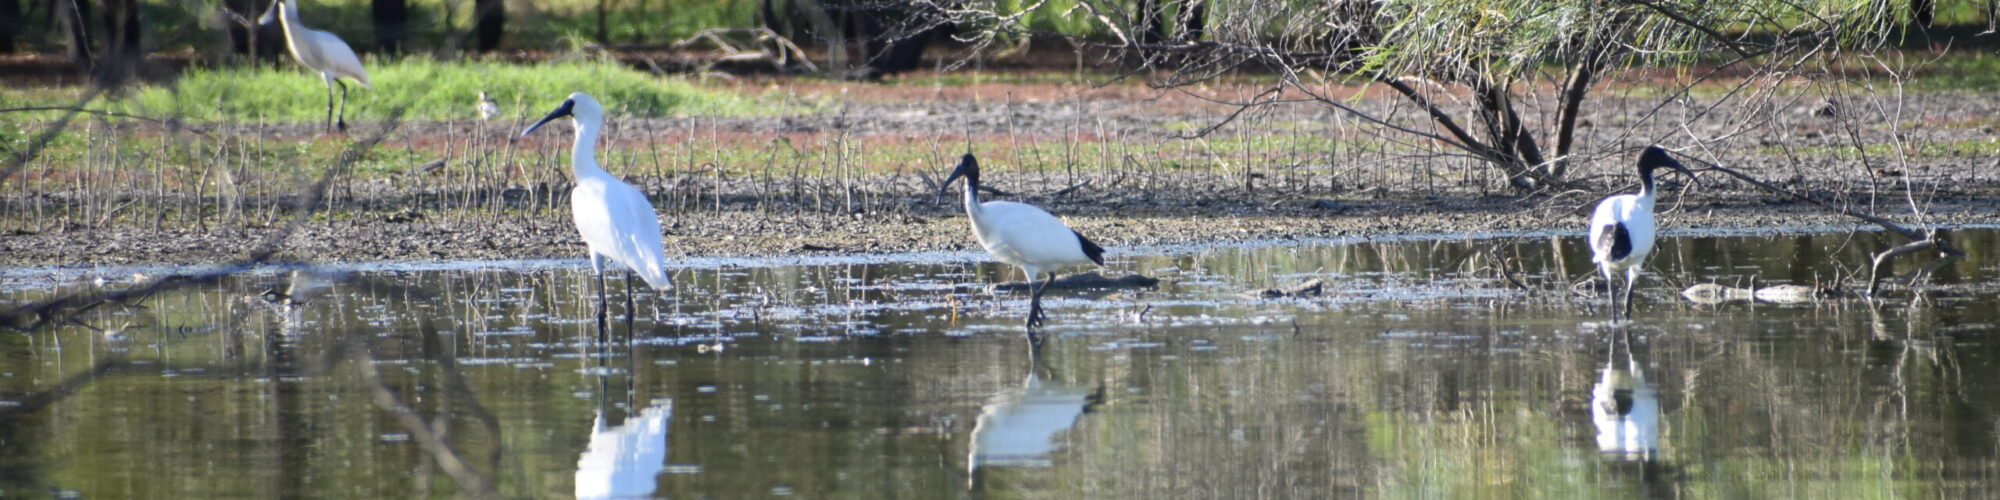 Figure 1 Royal spoonbill (left) and Australian white ibis (right) foraging in a temporary warrambool that adjoins the Gwydir Warrambools. Photo credit Tamara Kermode.